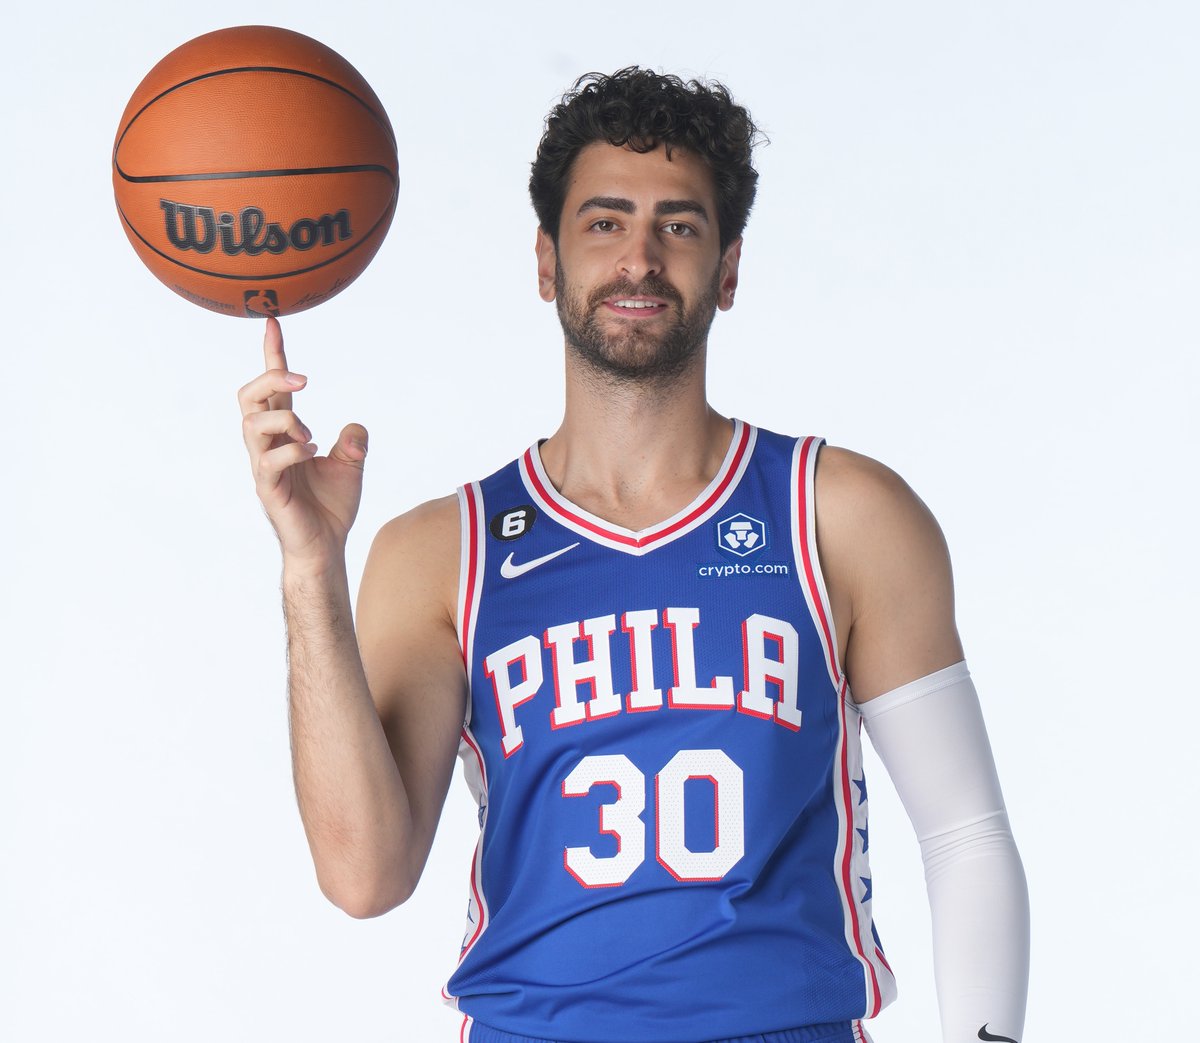 RT @NBA: Join us in wishing @FurkanKorkmaz of the @sixers a HAPPY 26th BIRTHDAY! #NBABDAY https://t.co/RmMzYfNQ81